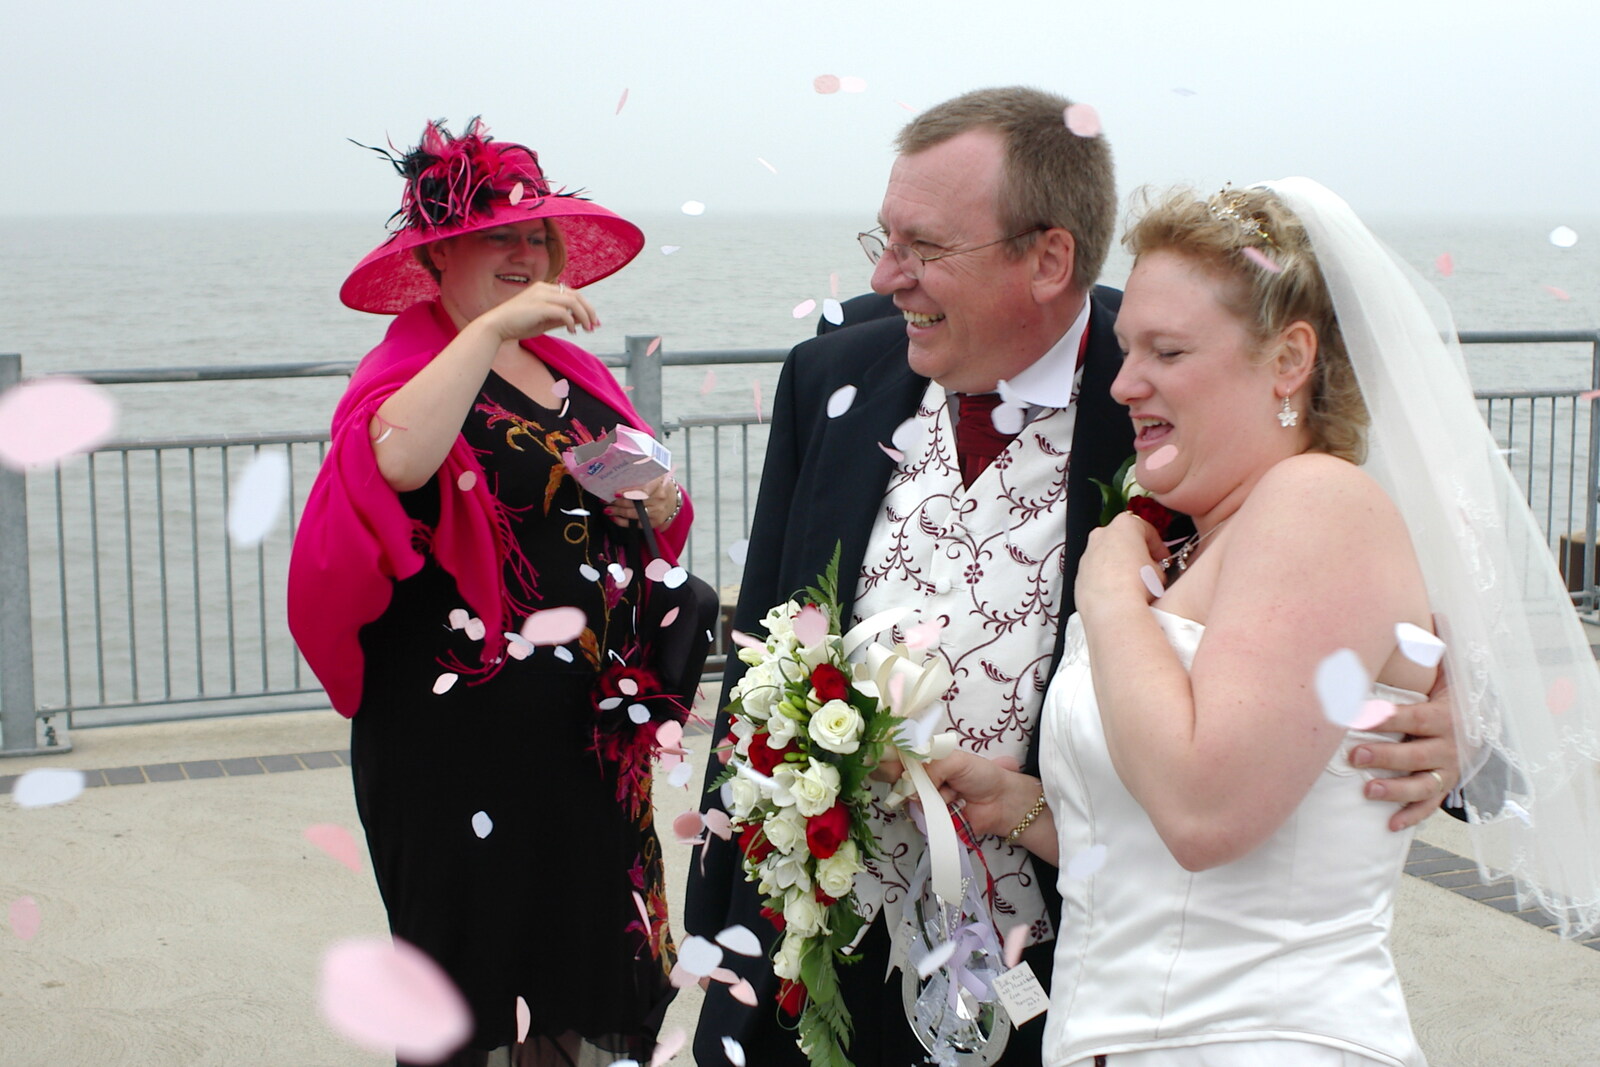 A confetti moment from Sally and Paul's Wedding on the Pier, Southwold, Suffolk - 3rd September 2005